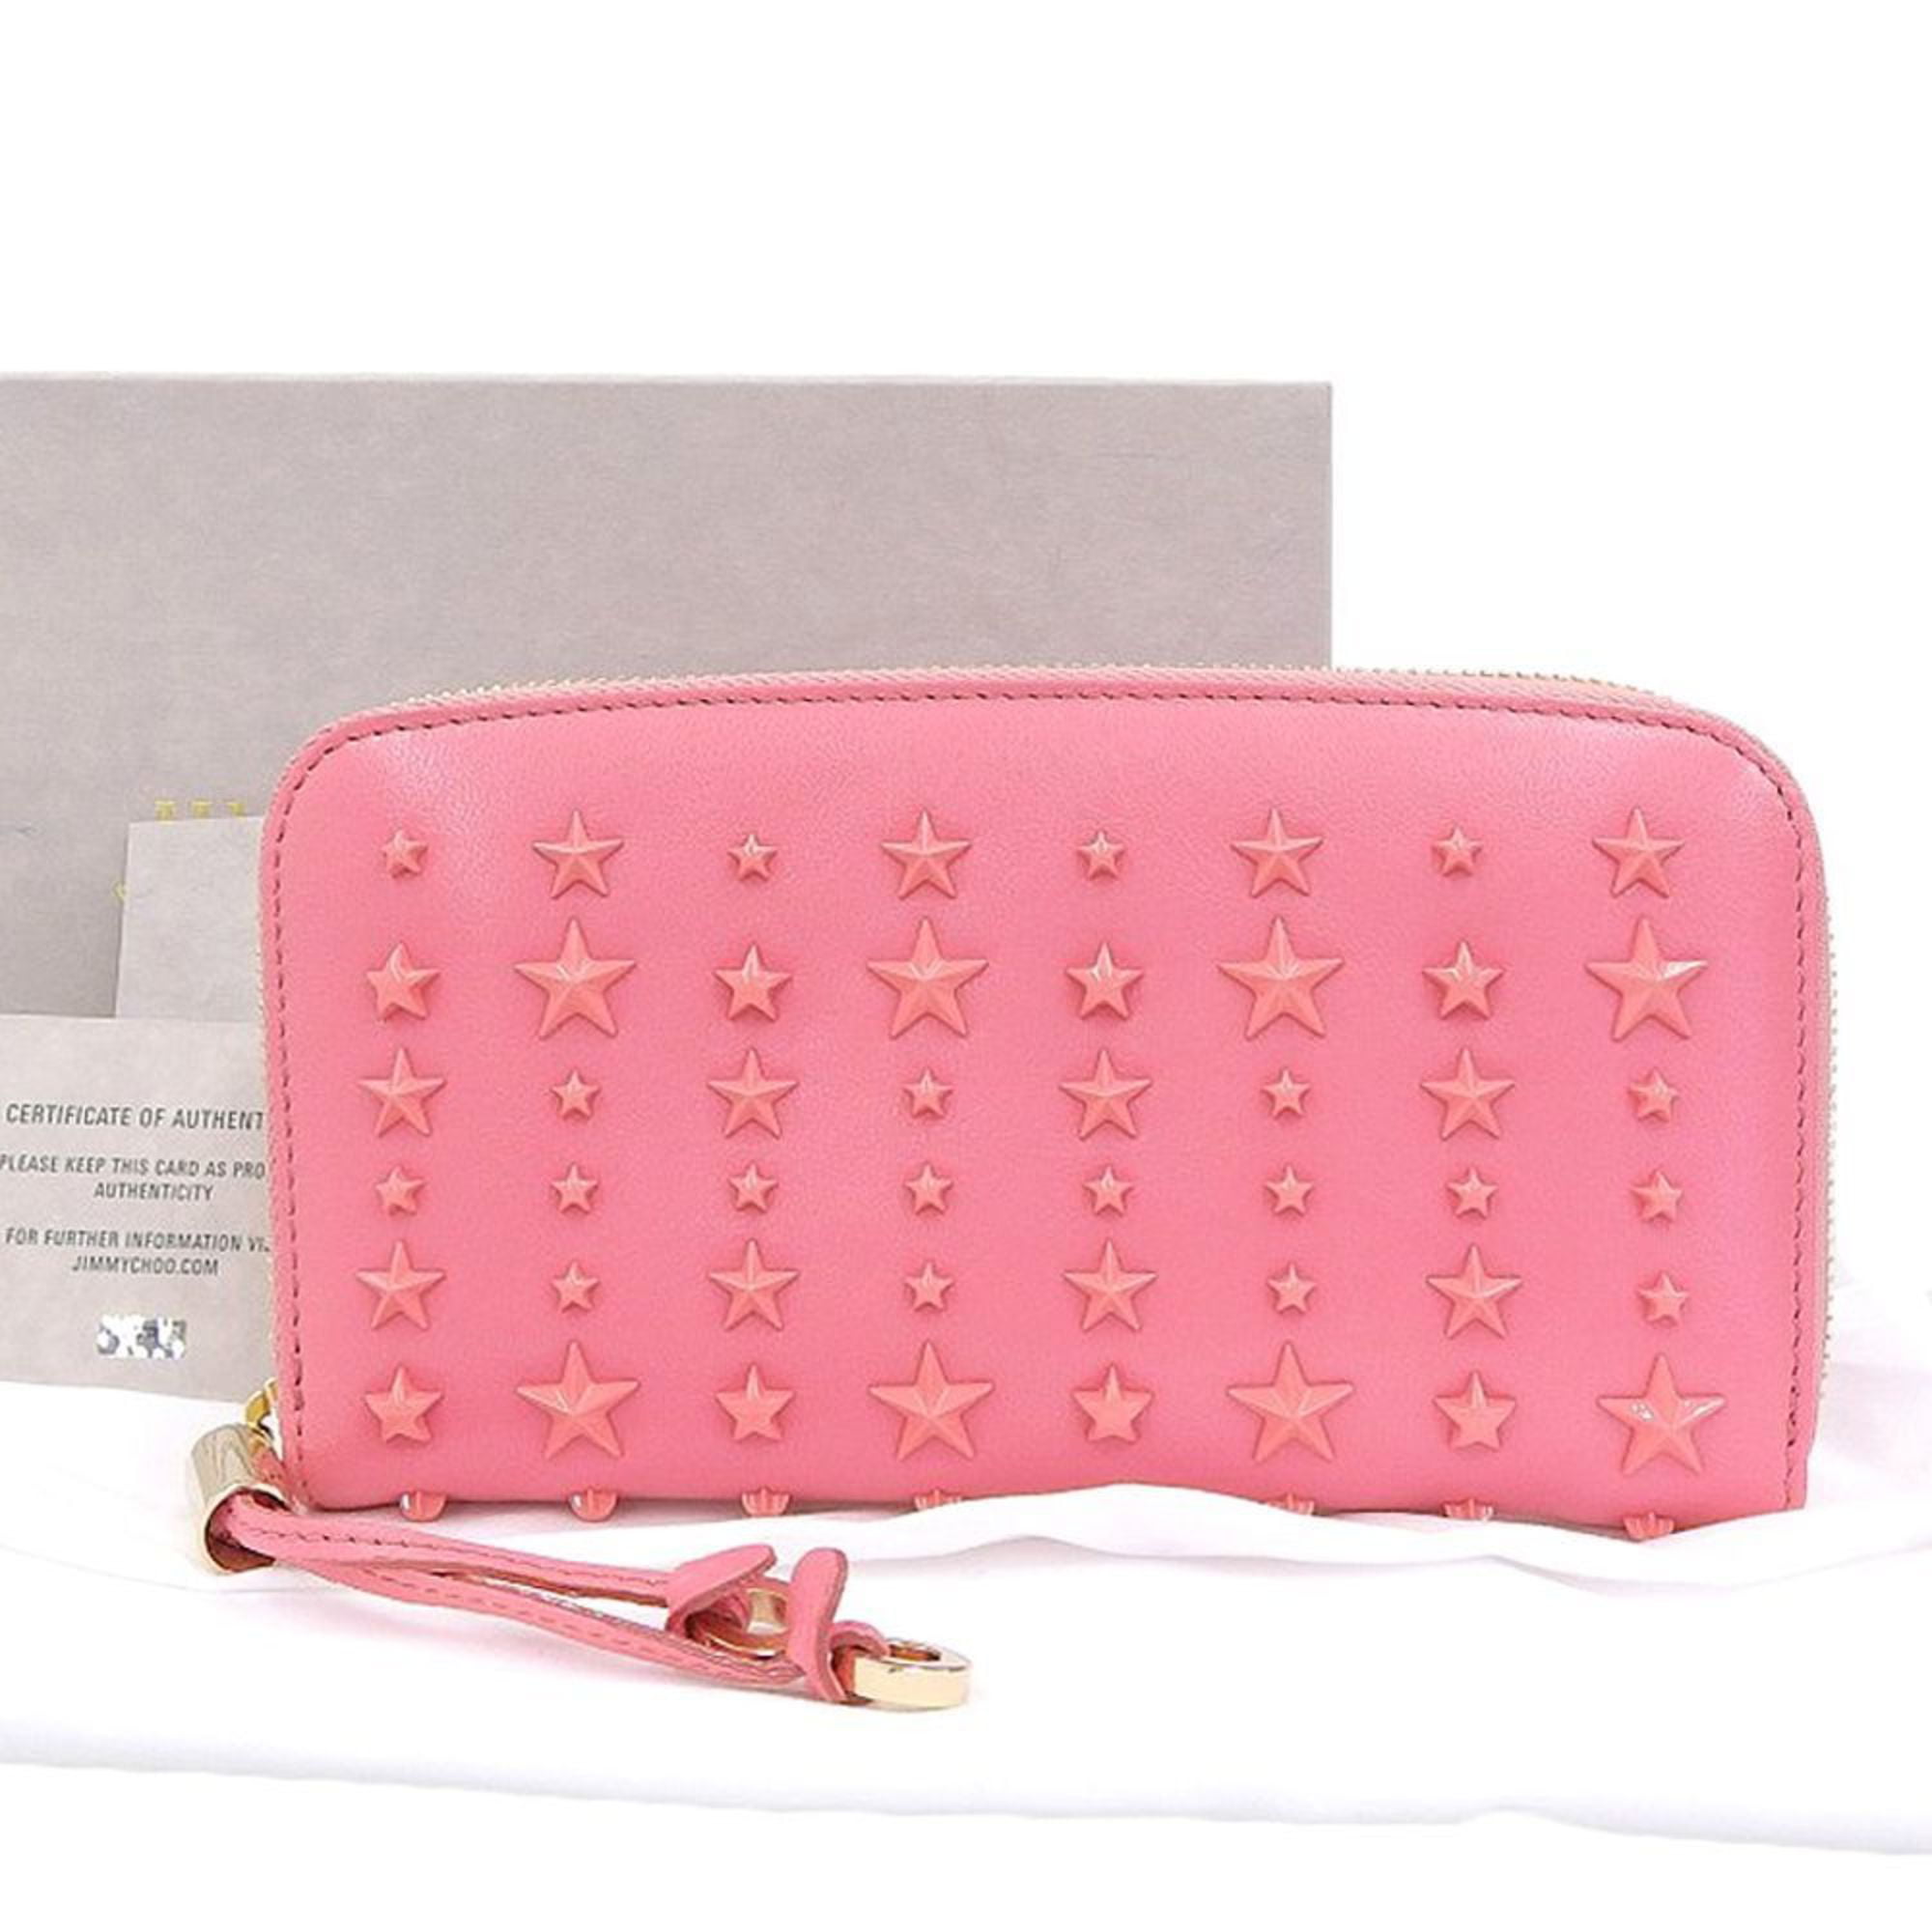 Jimmy Choo wallet with his classic star studs. Comes... - Depop